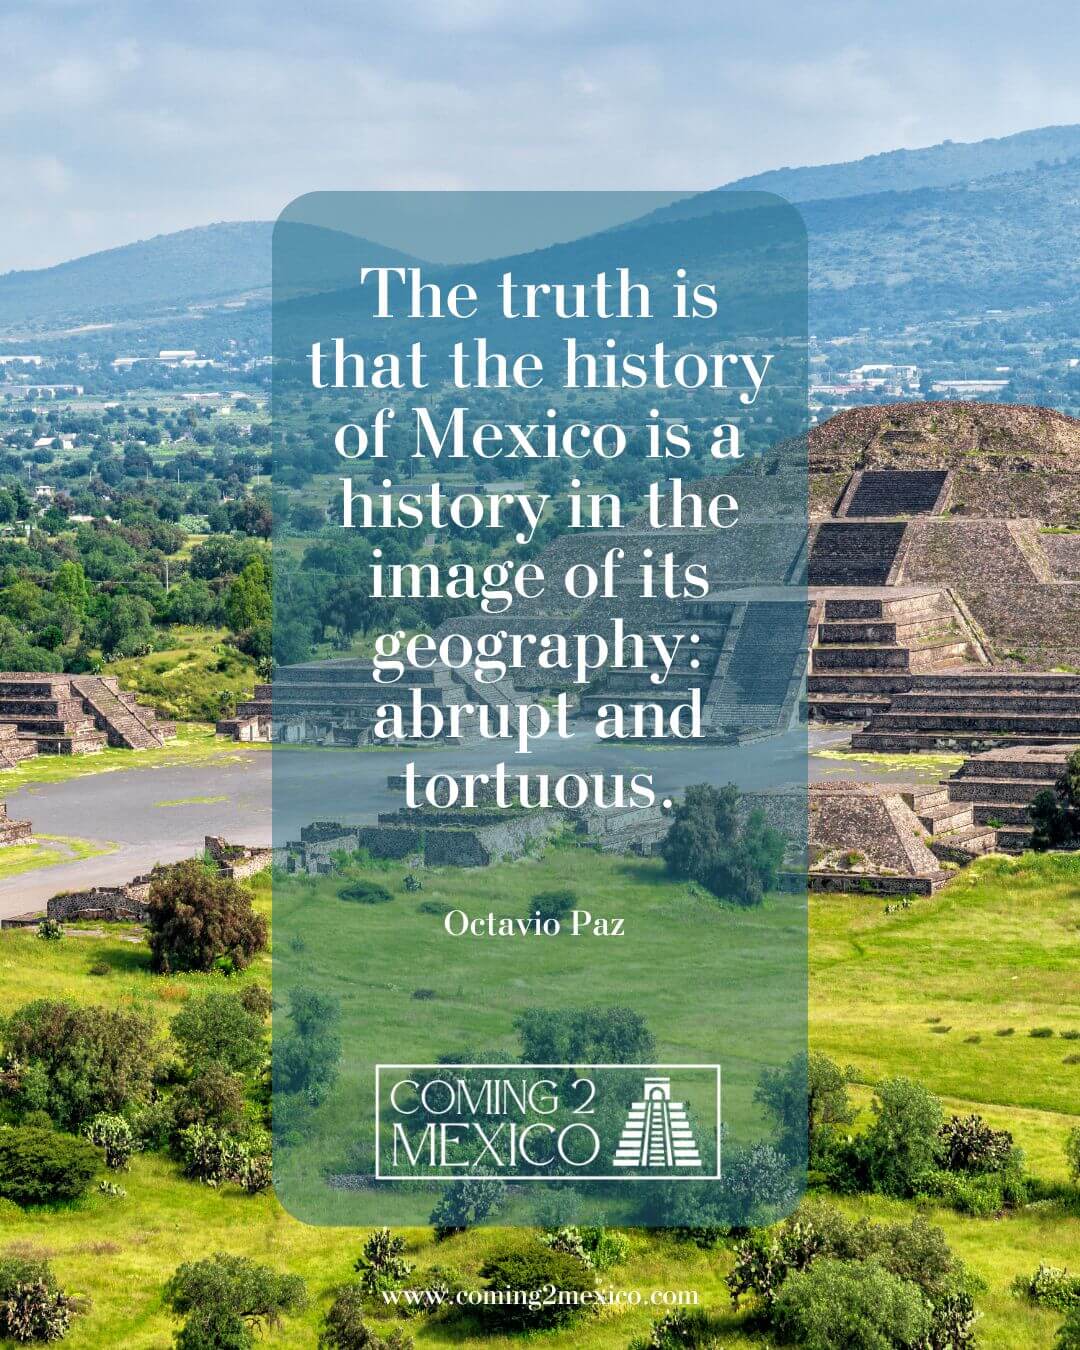 The truth is that the history of Mexico is a history in the image of its geography: abrupt and tortuous.